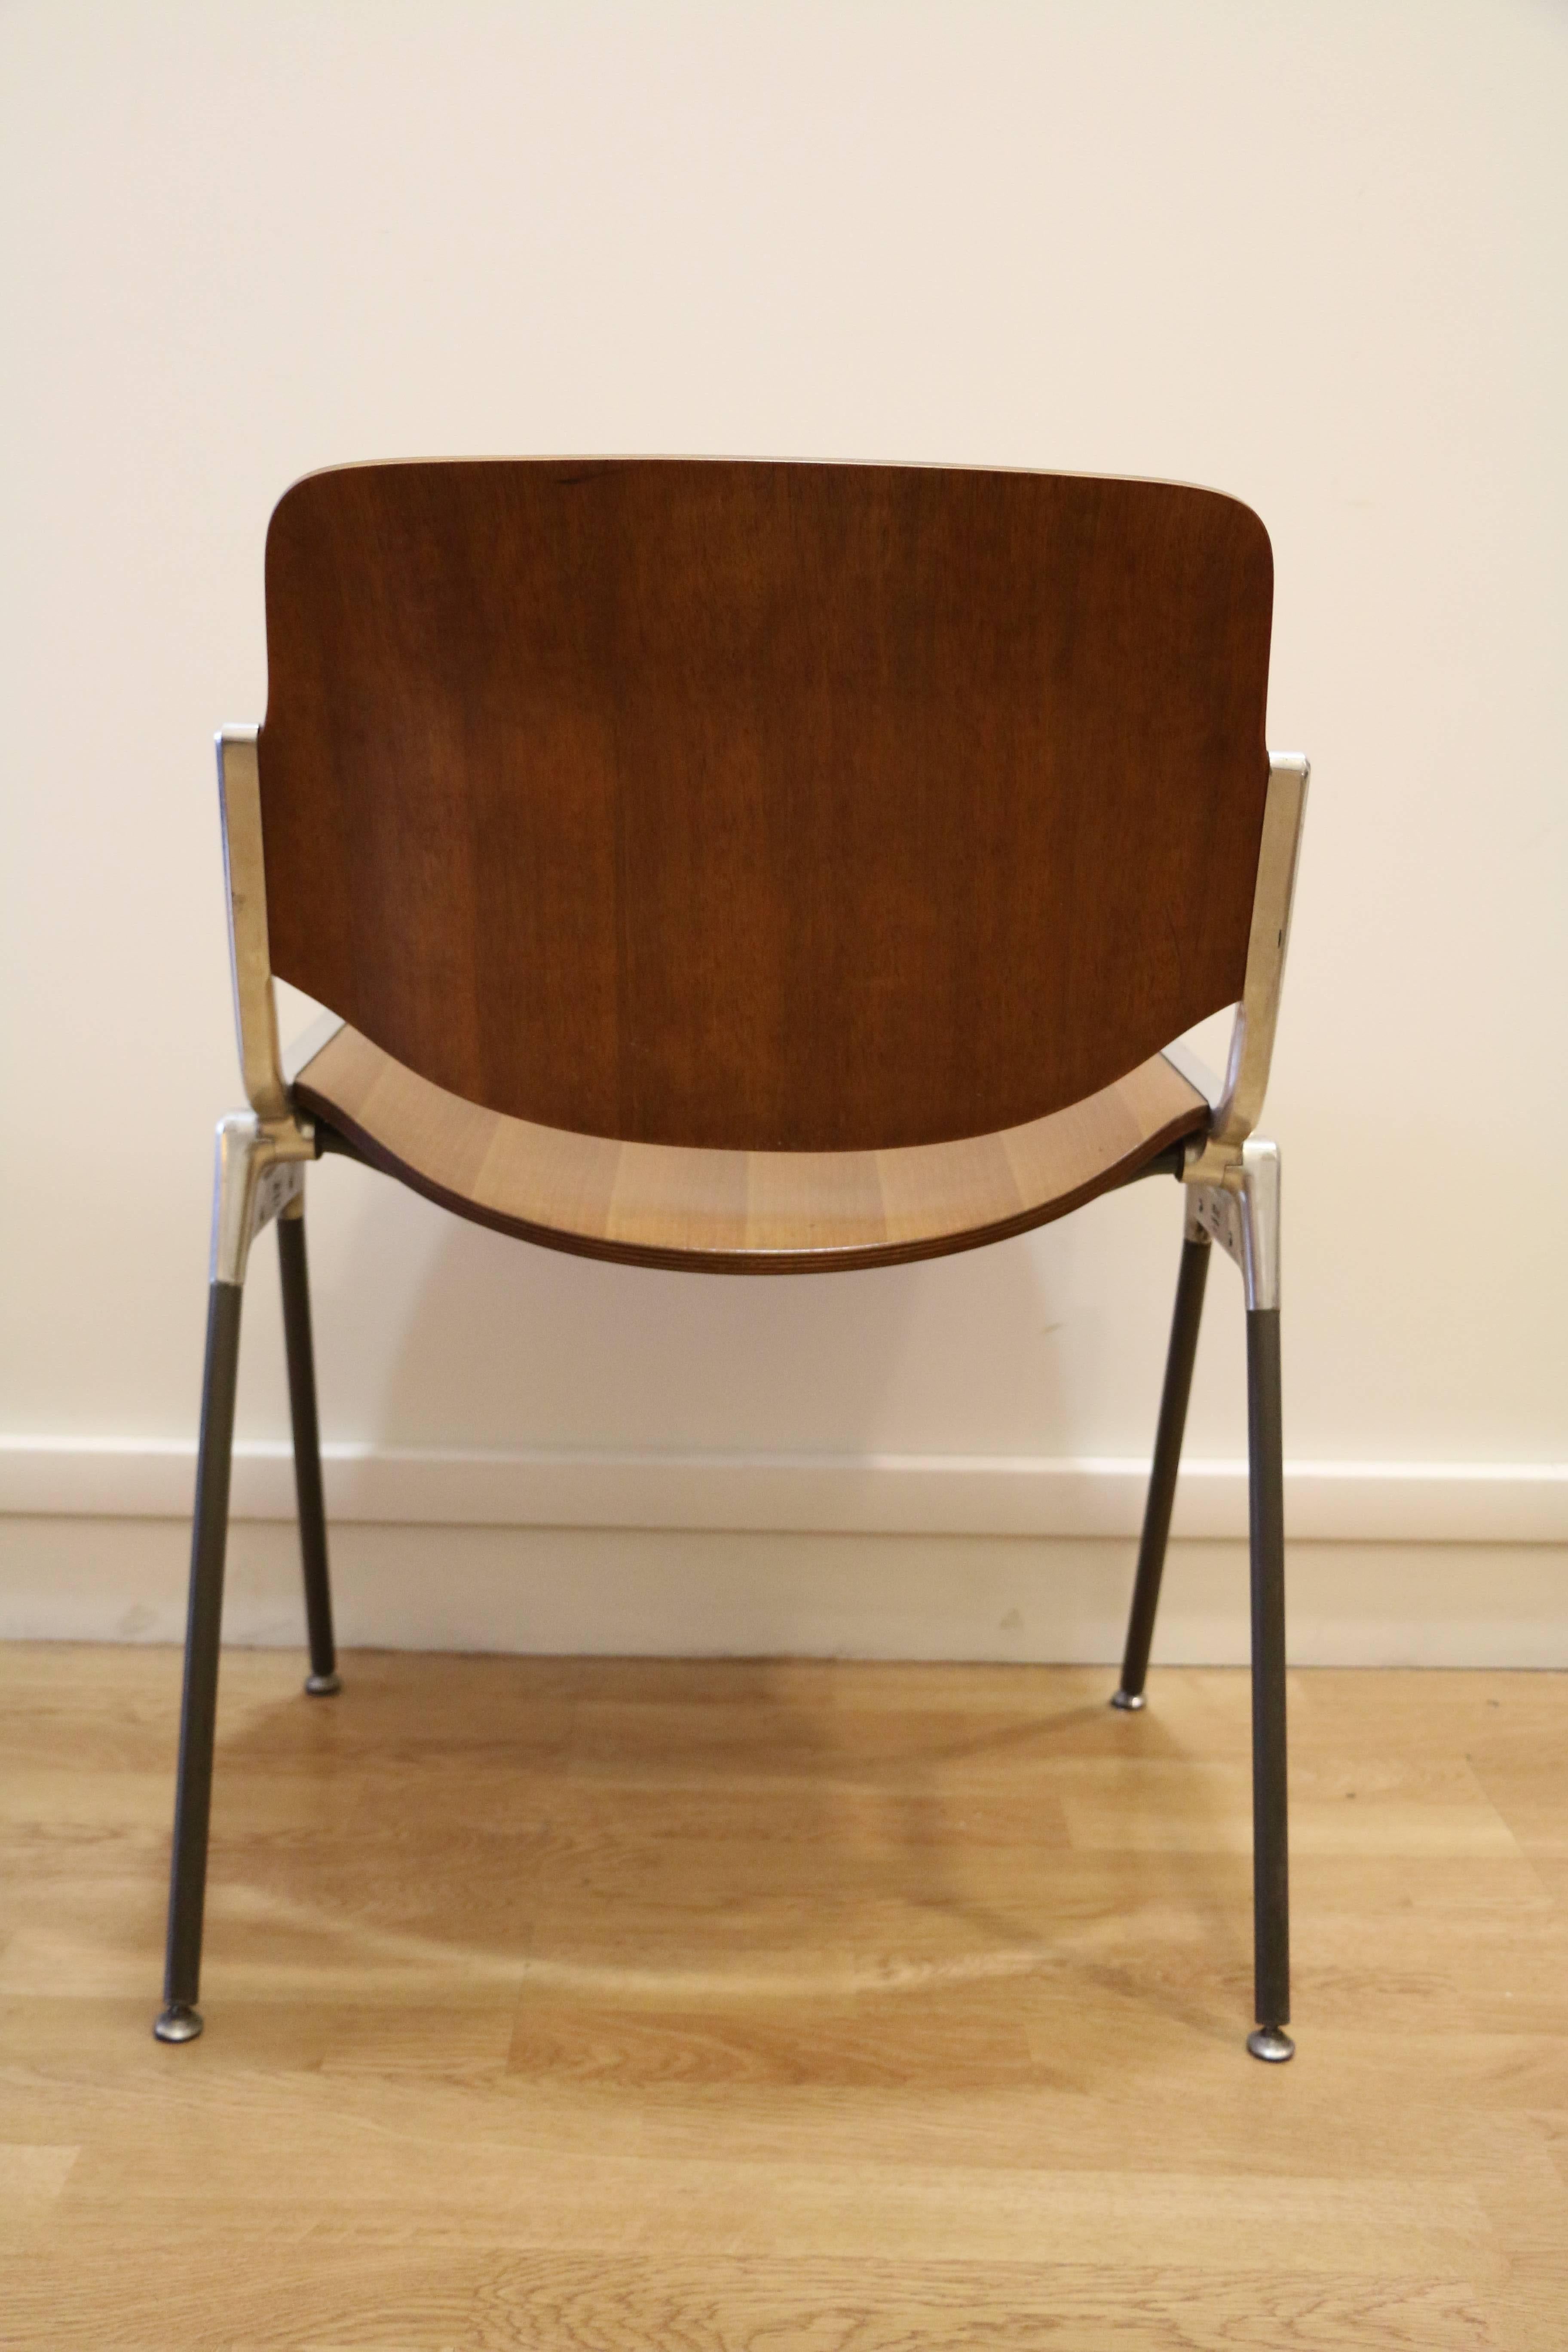 Molded Set of Six Mid-Century Modern Chairs by Giancarlo Piretti, Italy, 1970s For Sale